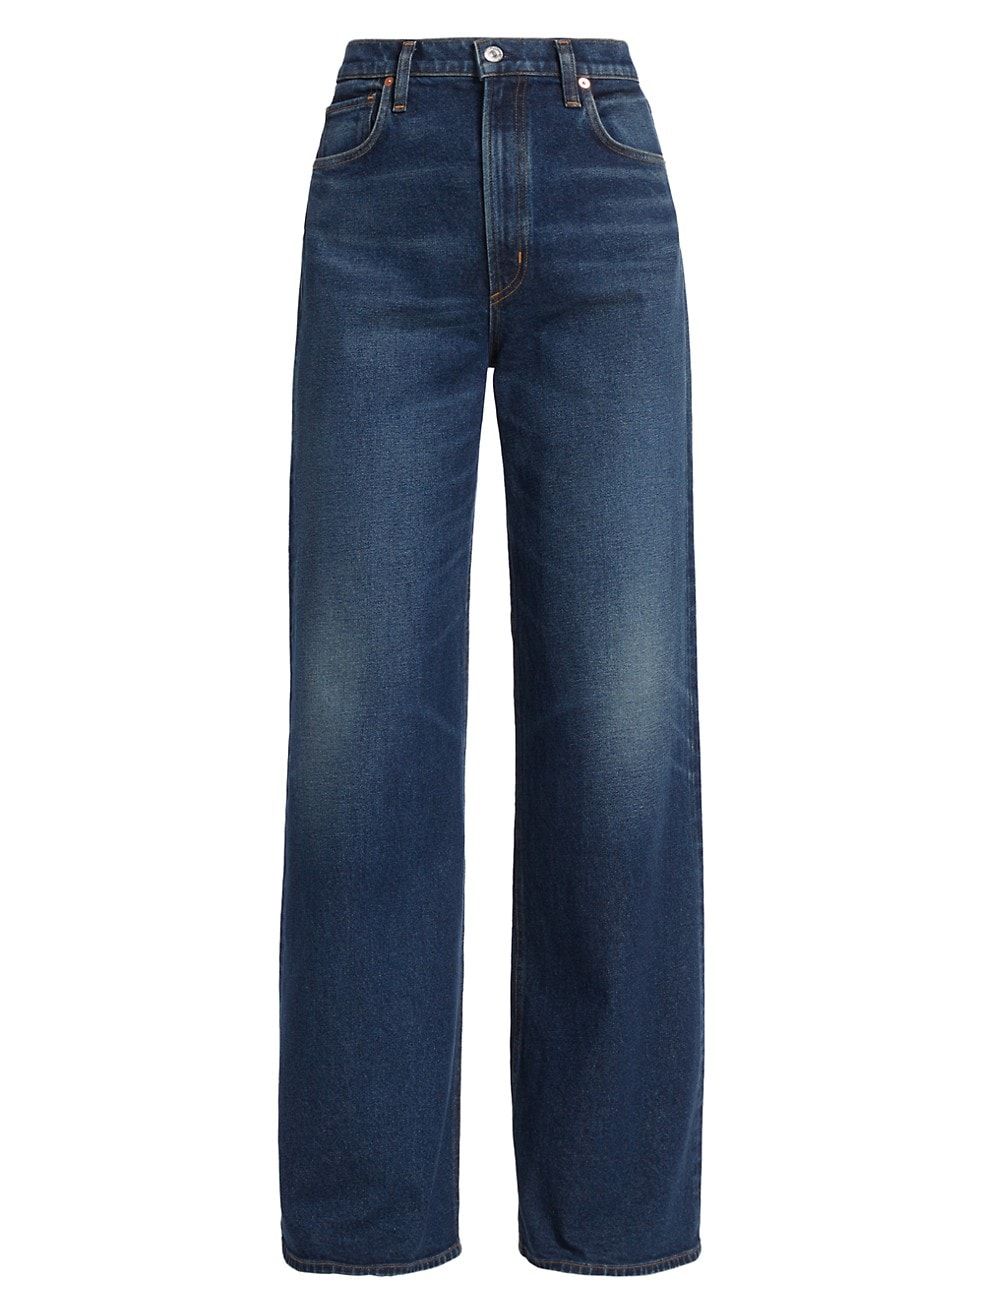 Citizens of Humanity Paloma Baggy Wide-Leg Jeans | Saks Fifth Avenue